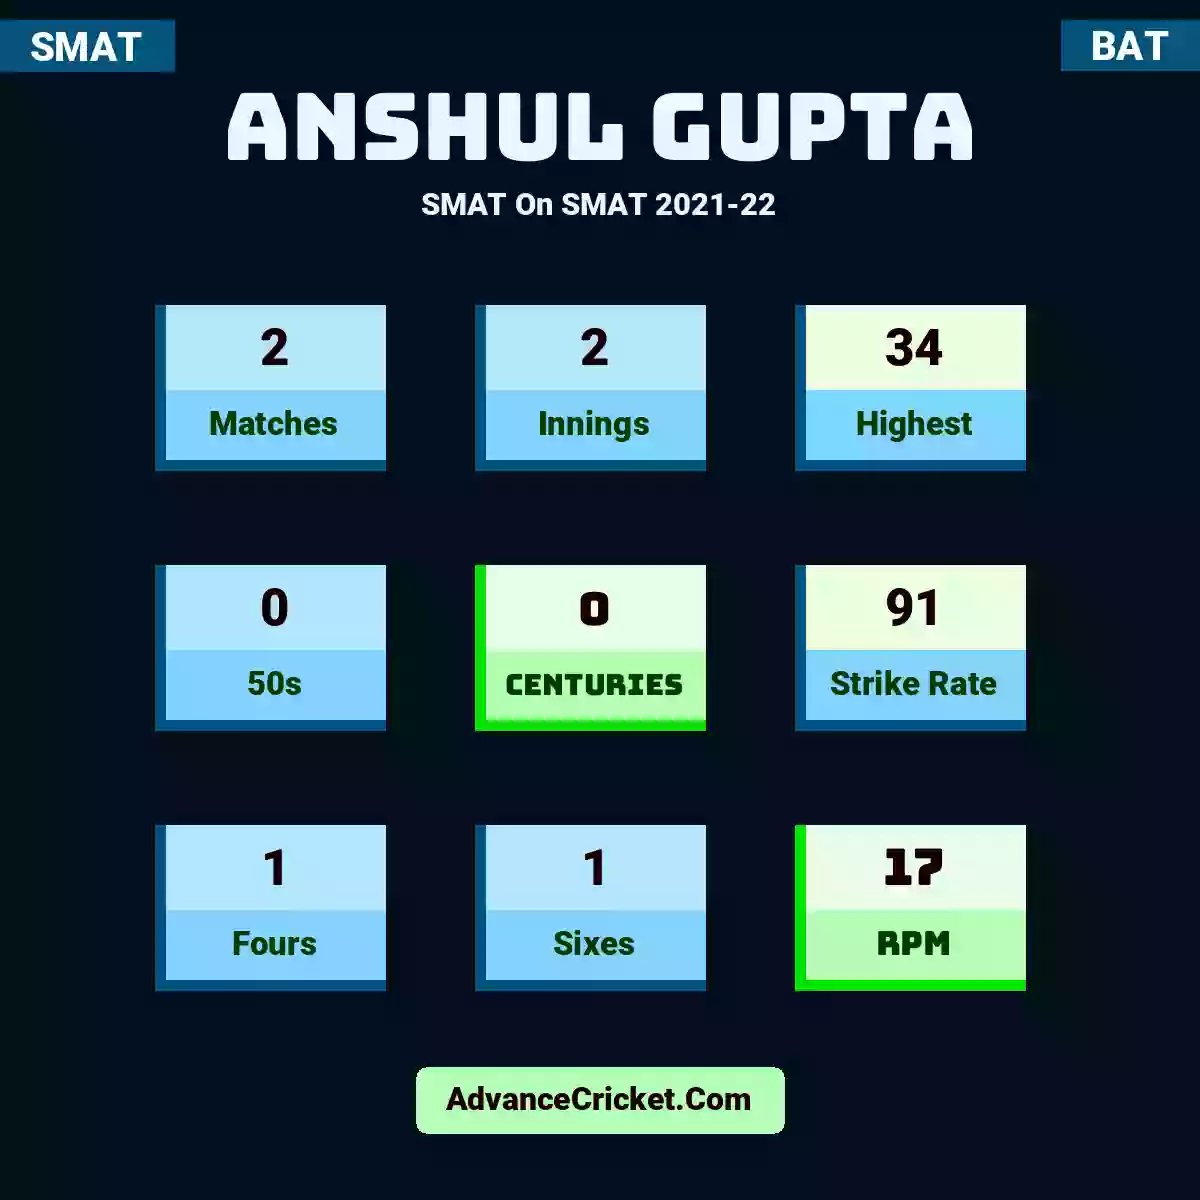 Anshul Gupta SMAT  On SMAT 2021-22, Anshul Gupta played 2 matches, scored 34 runs as highest, 0 half-centuries, and 0 centuries, with a strike rate of 91. A.Gupta hit 1 fours and 1 sixes, with an RPM of 17.